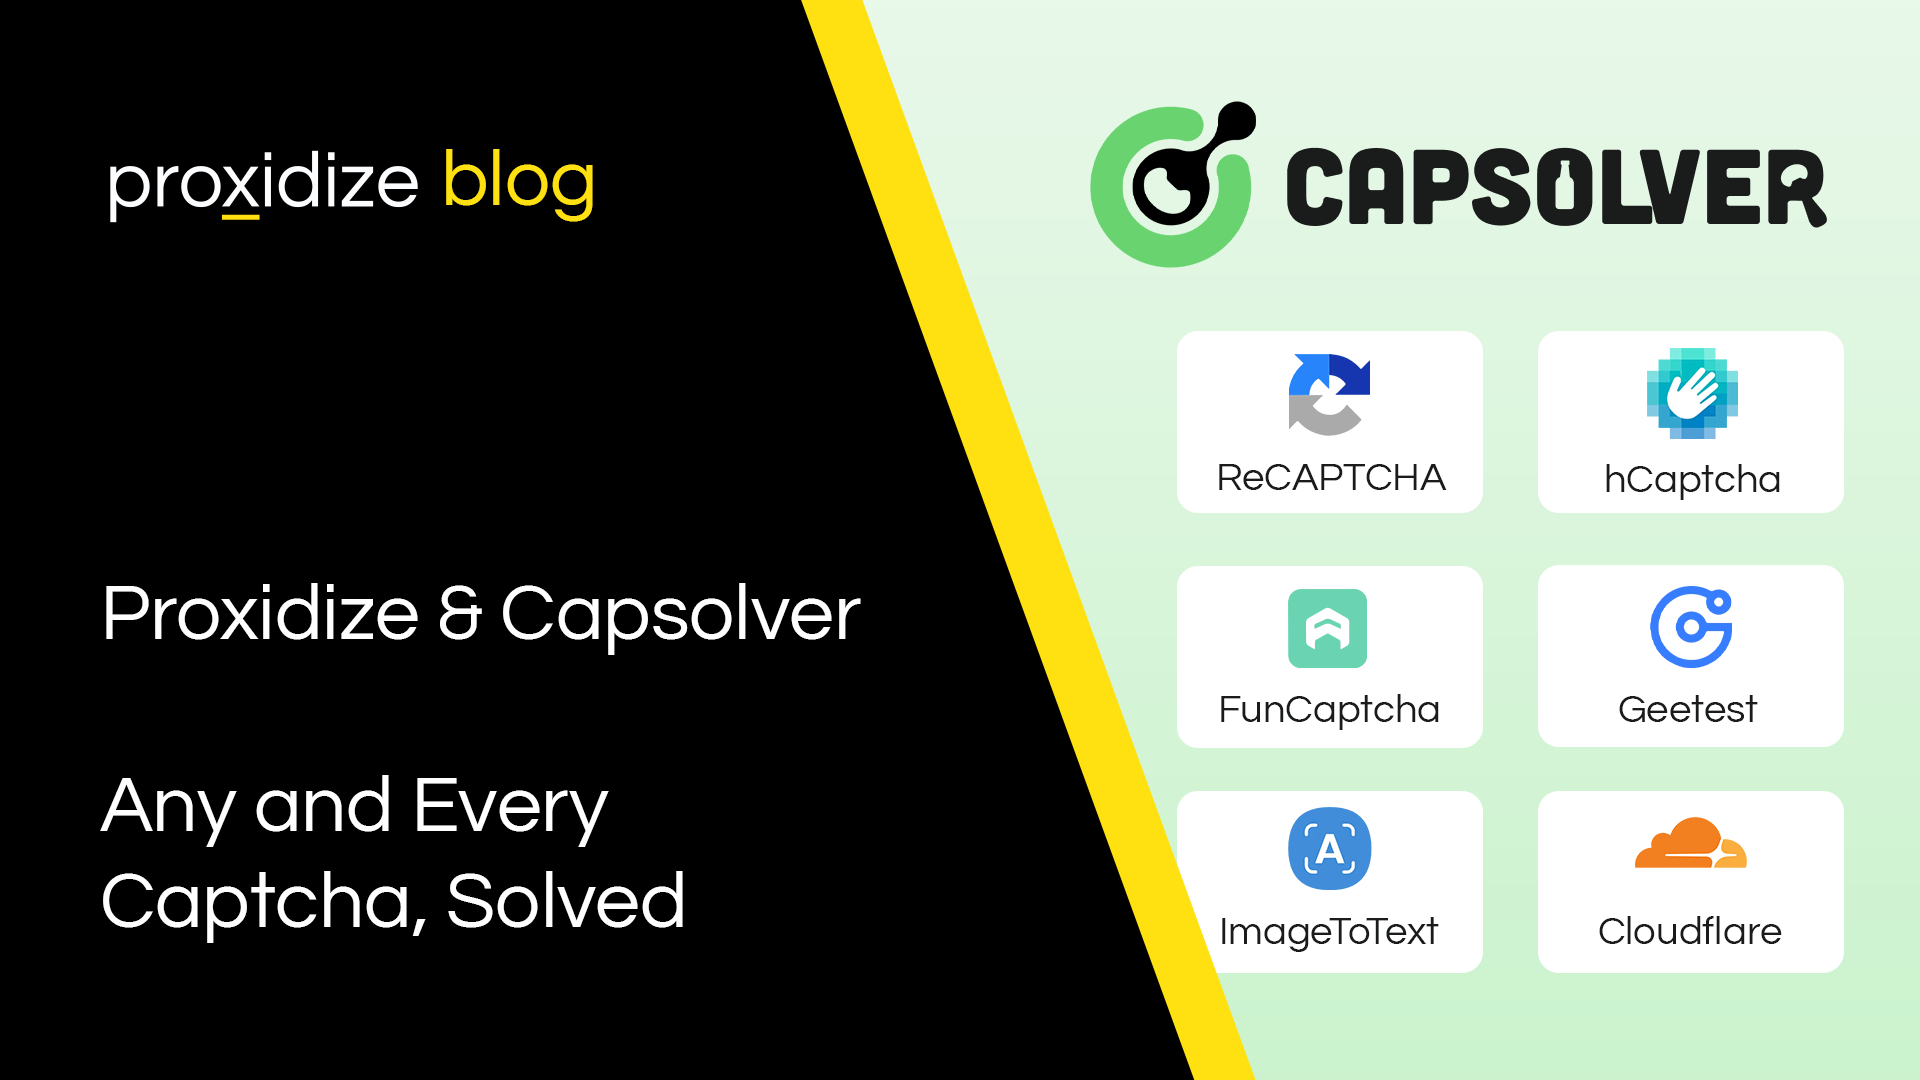 Proxidize & Capsolver — Any and Every Captcha, Solved